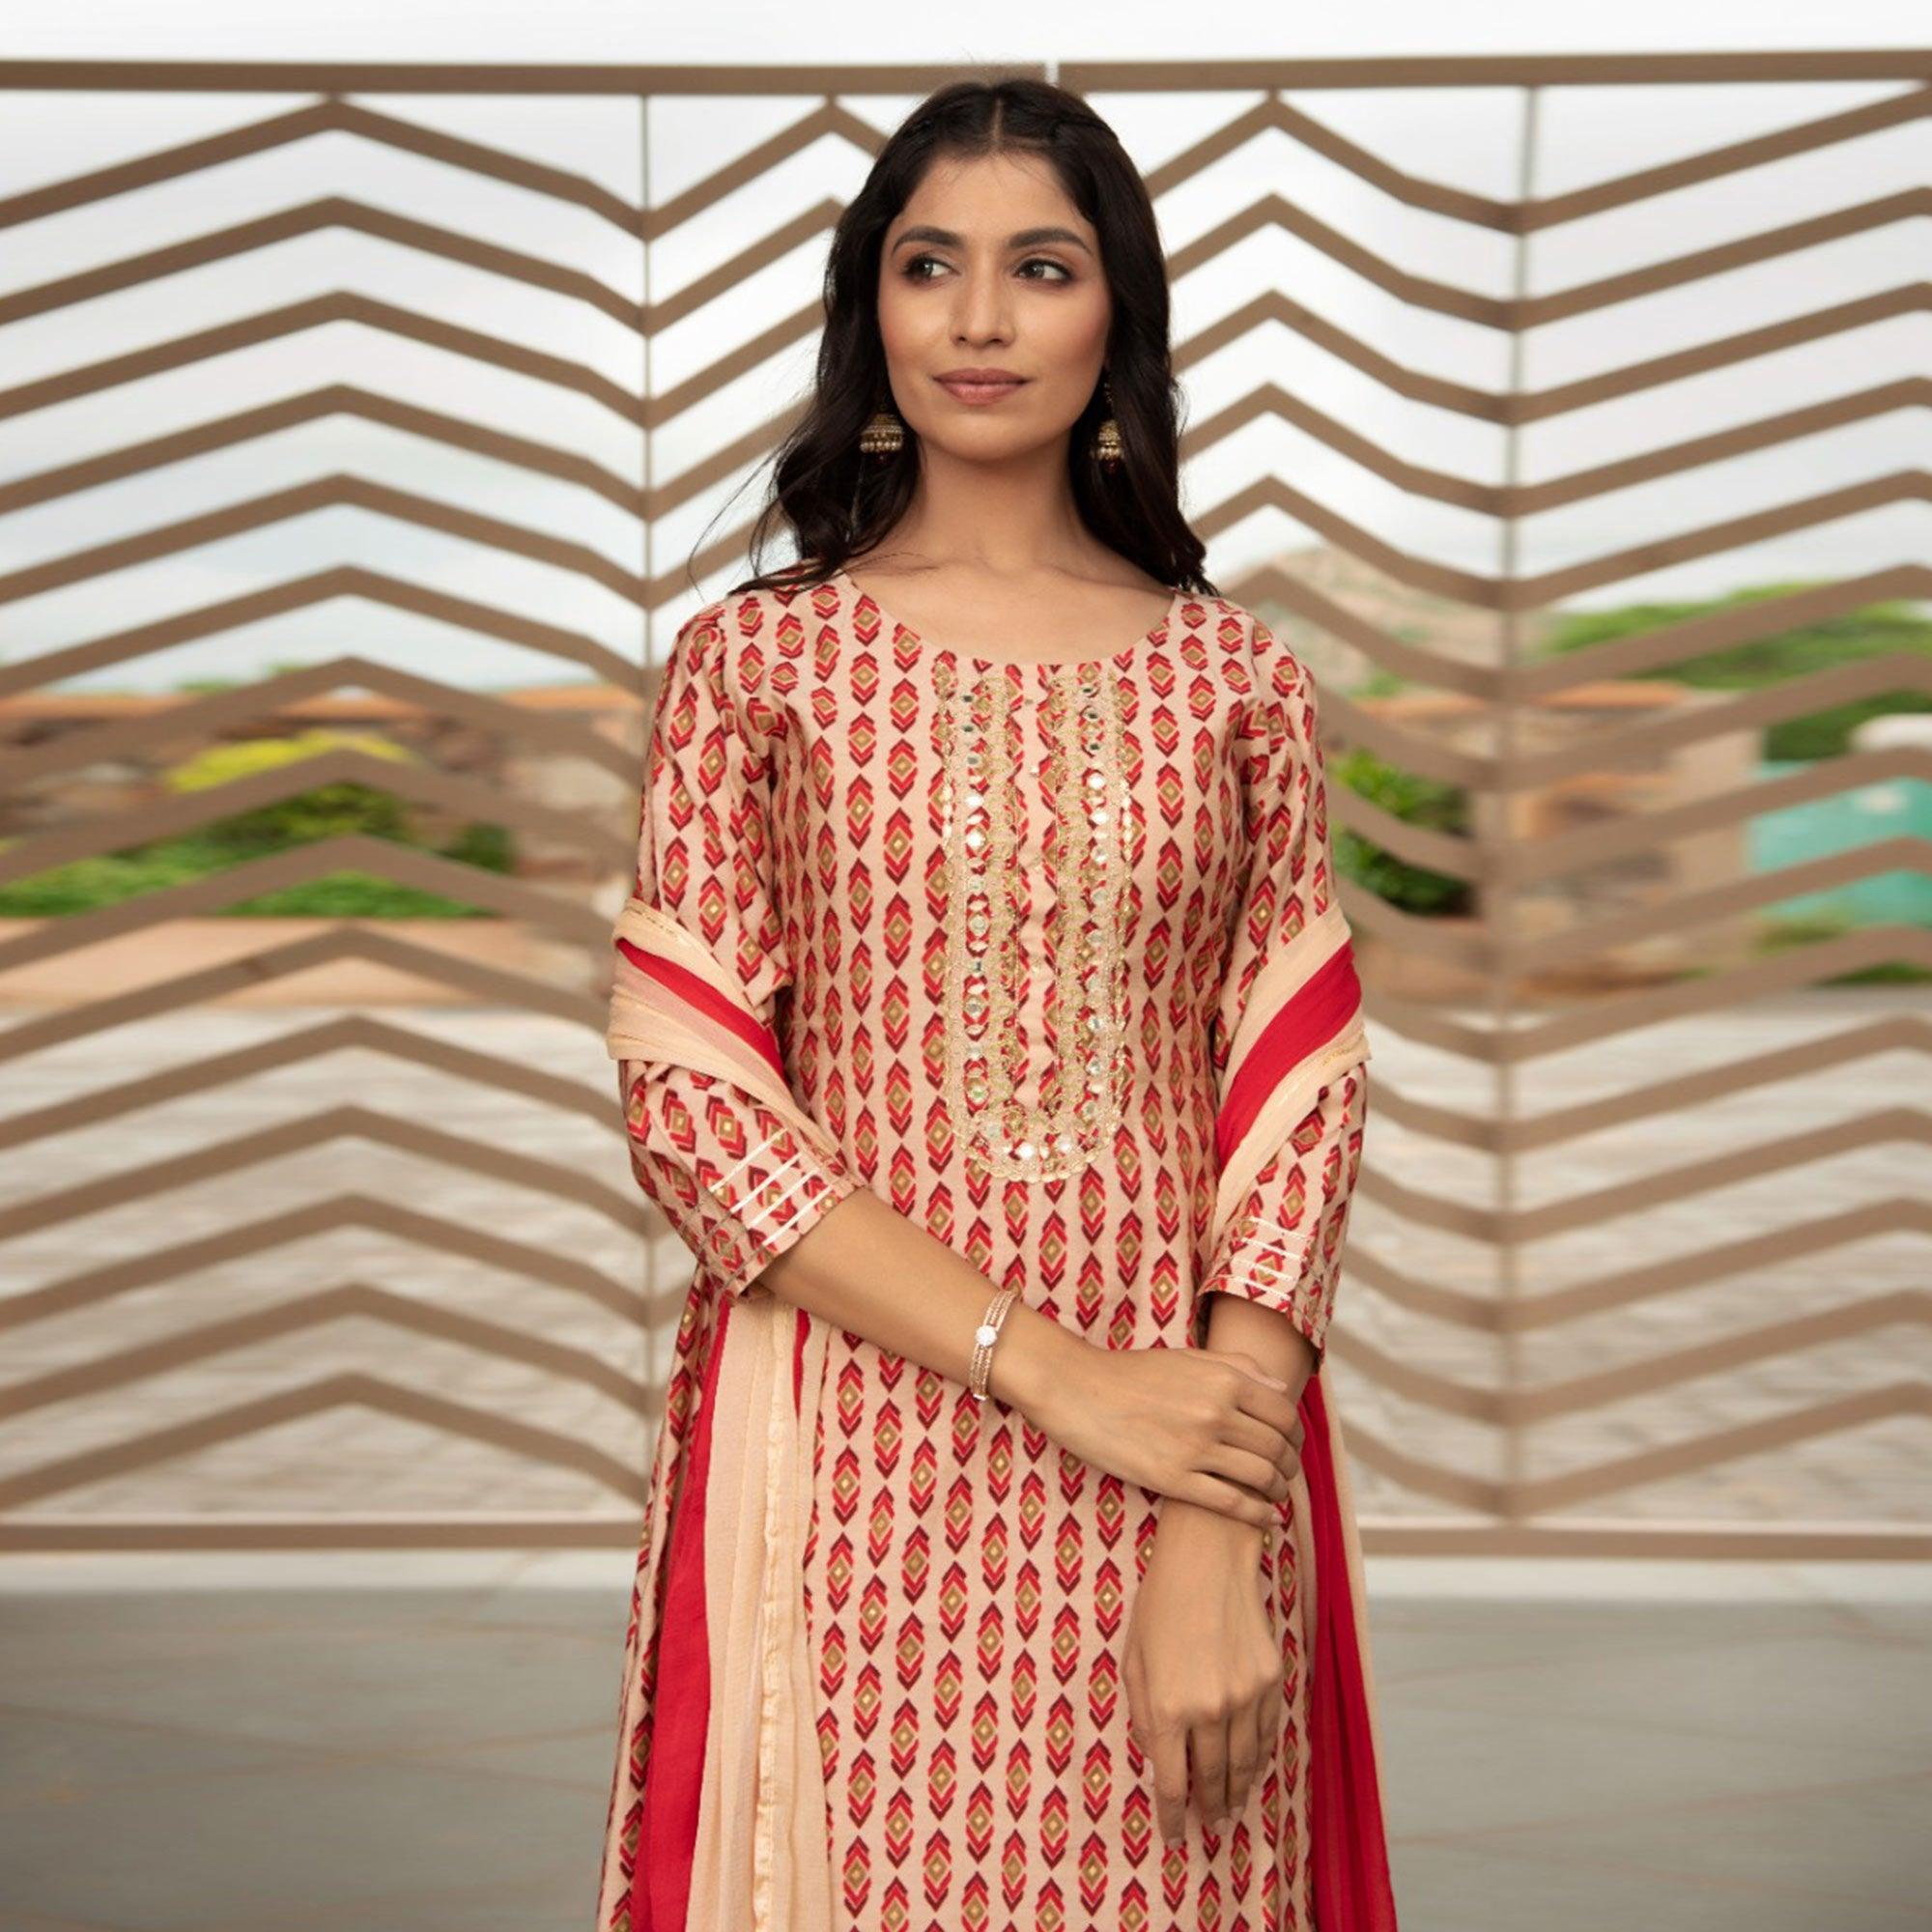 PARTY WEAR KURTI PANT & DUPATTA 𝐅𝐈𝐑𝐒𝐓 𝐋𝐈𝐆𝐇𝐓 𝐂𝐎𝐋𝐋𝐄𝐂𝐓𝐈𝐎𝐍  at Rs 1749.00 | Kurti With Pants, कुरती पैंट सेट - Anant Tex Exports  Private Limited, Surat | ID: 26541254355